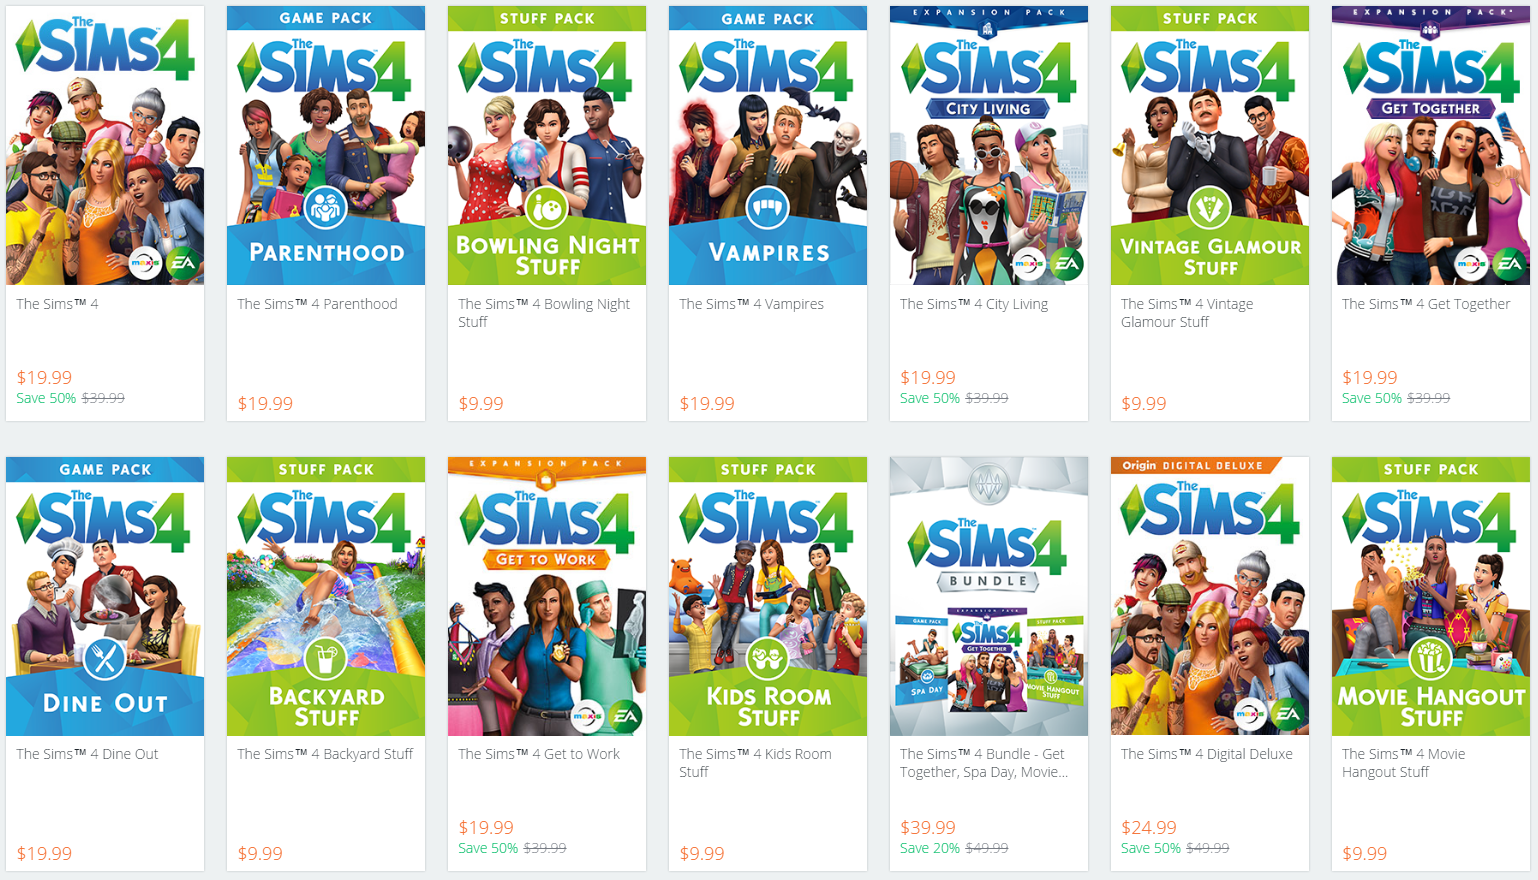 Origin Sale Save Up To 50 On The Sims 4 Games Simsvip